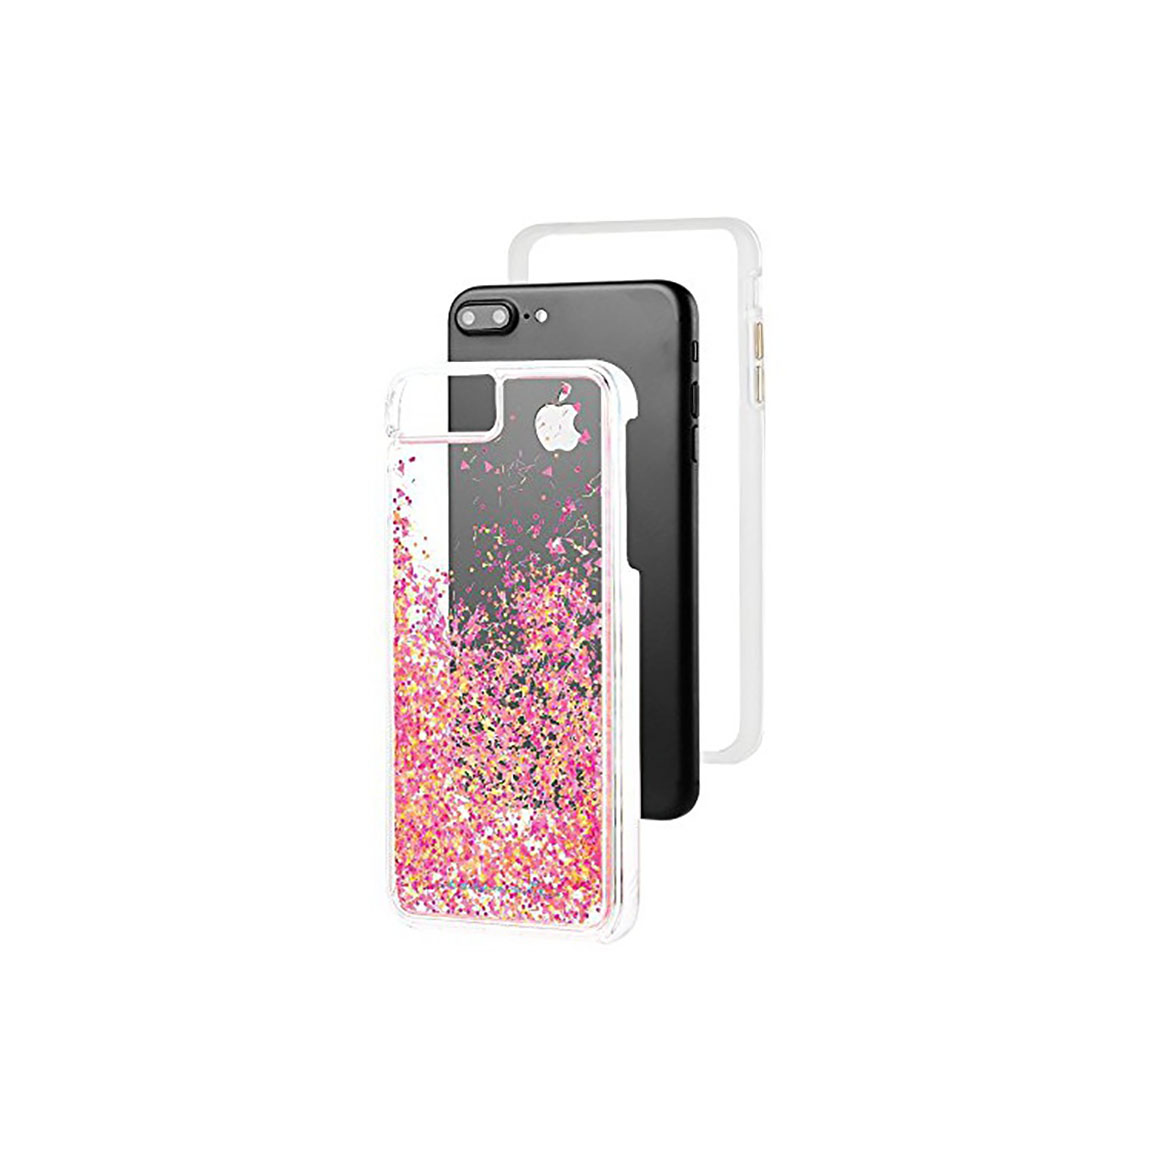 Case-Mate Glow Waterfall Case for iPhone 8 Plus/7 Plus/6s Plus - Pink Glow